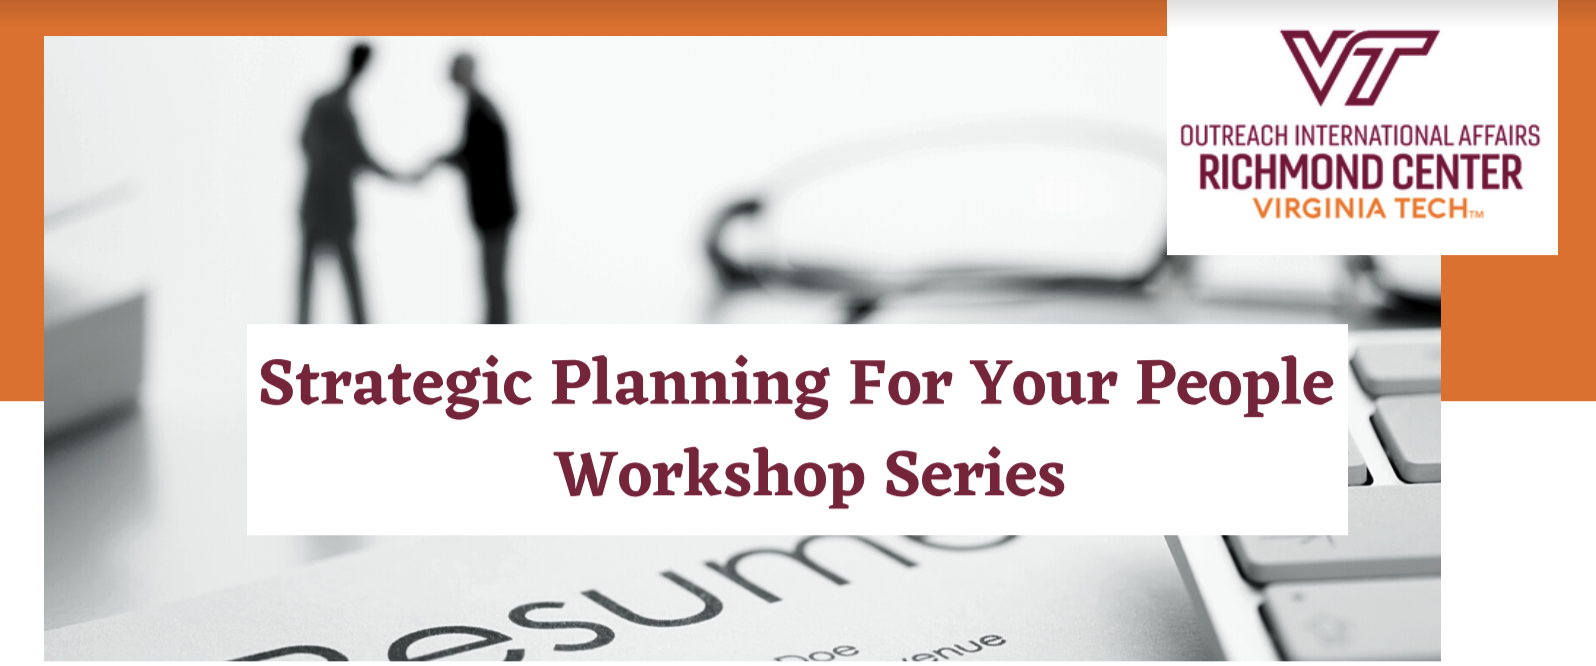 Strategic Planning For Your People Virtual Workshop Series